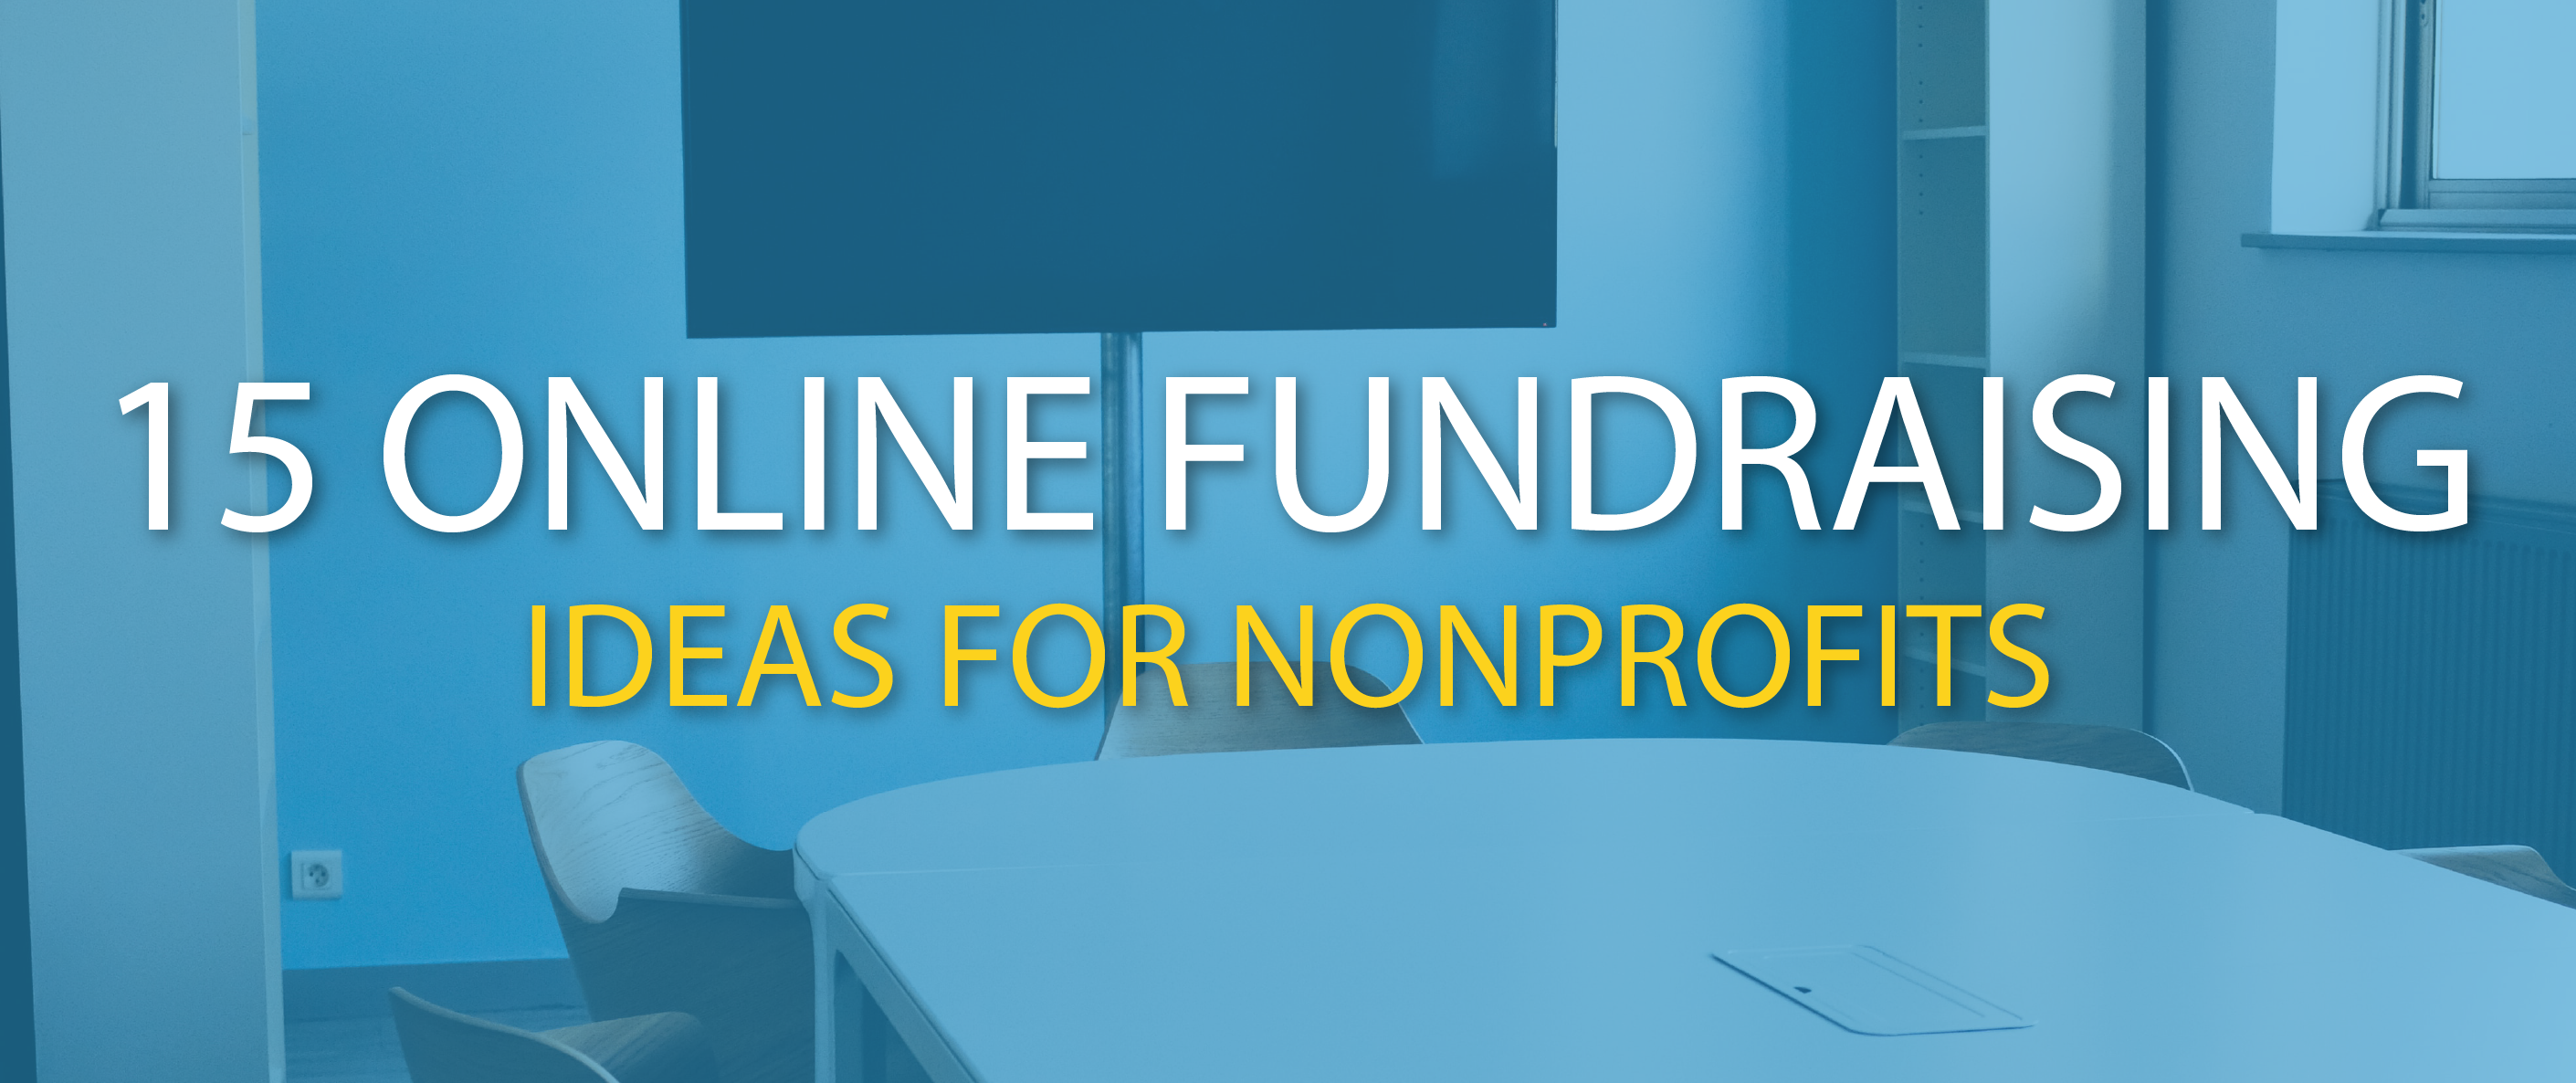 15 online fundraising ideas for nonprofits feature image